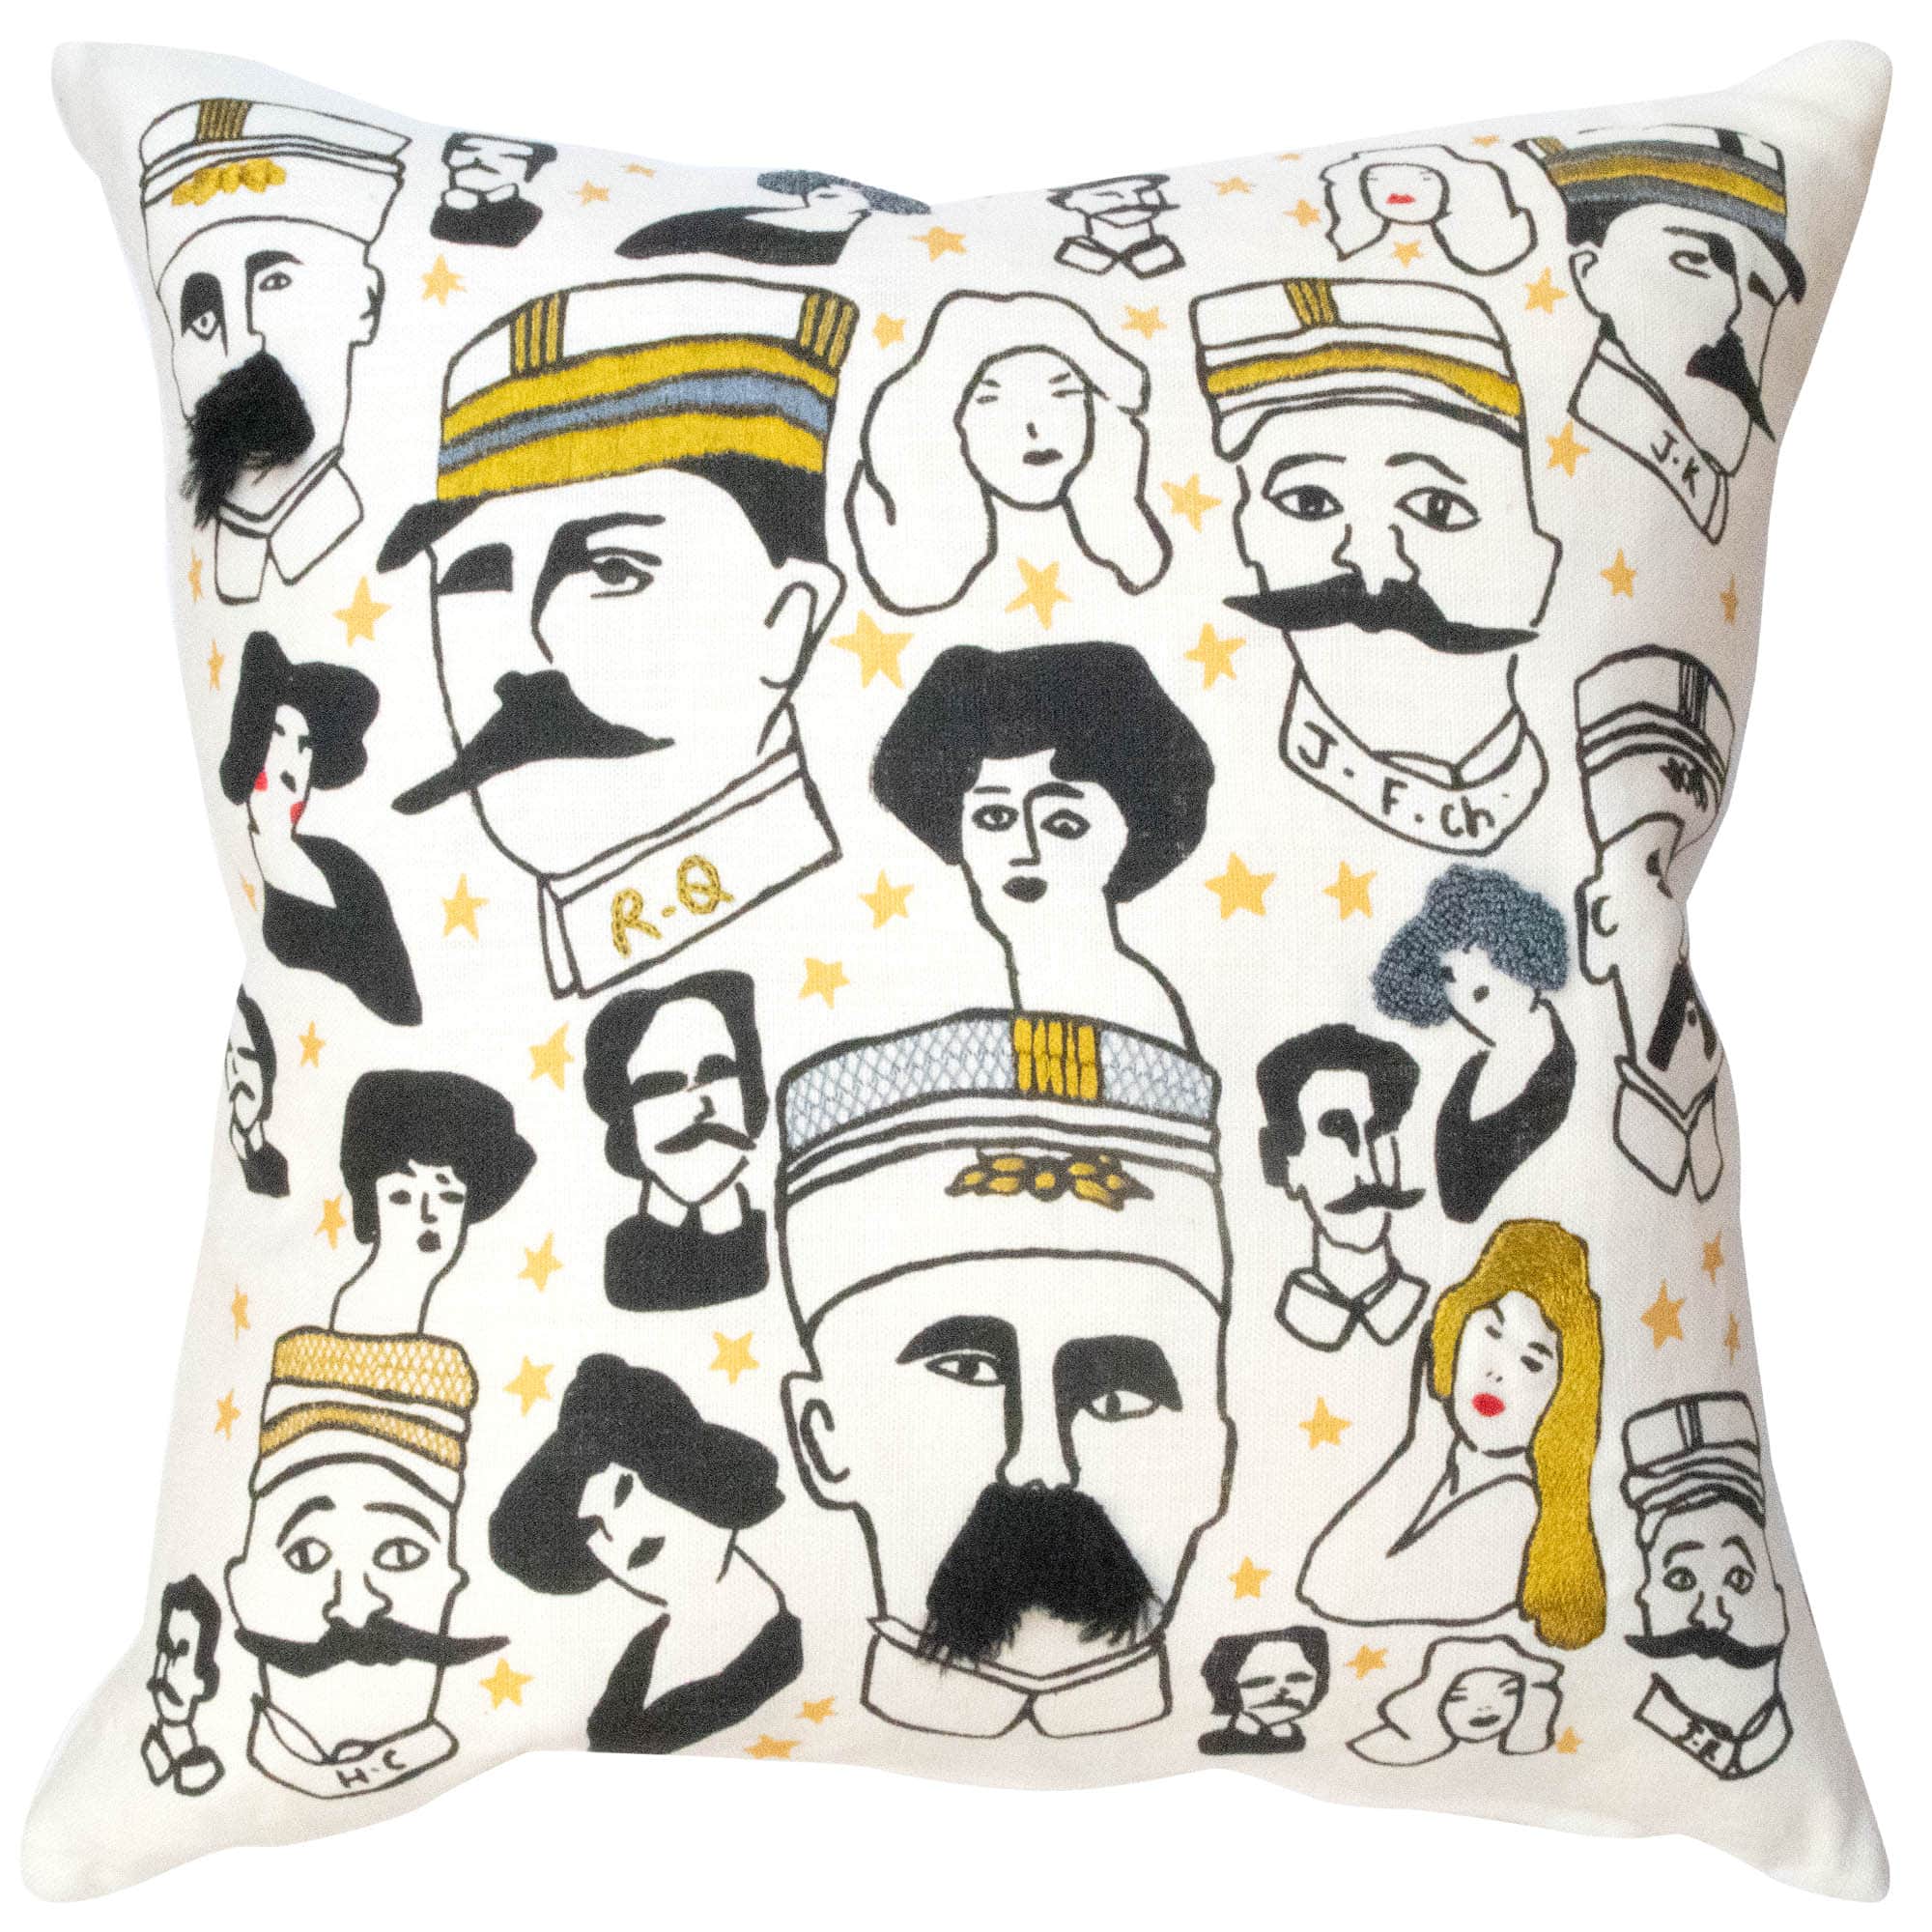 fine-cell-work-moustaches-hand-embroidered-linen-cushion.jpg